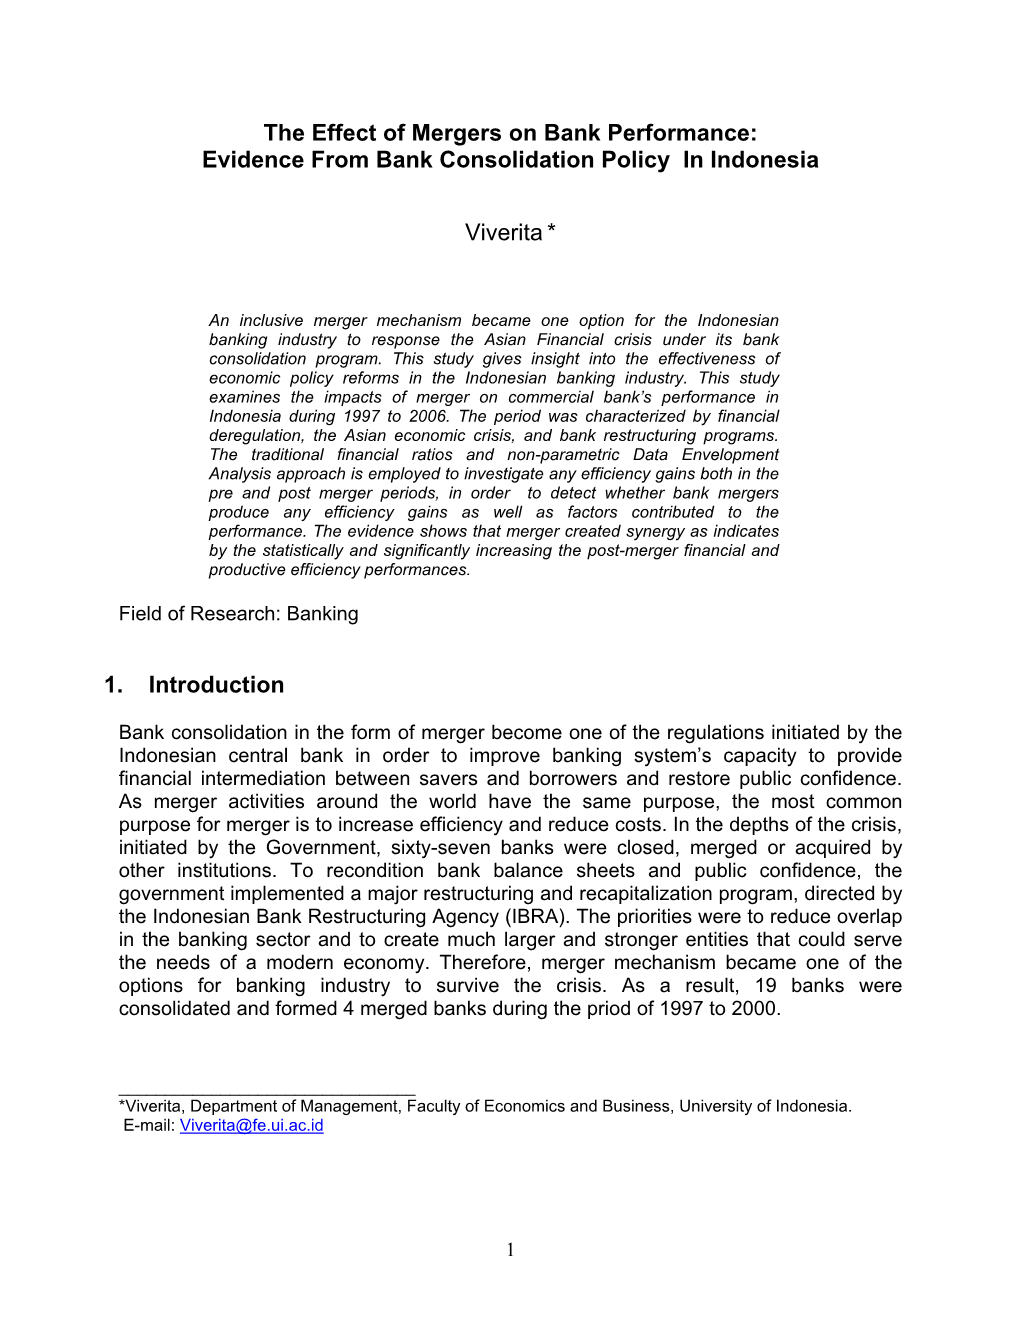 The Effect of Mergers on Bank Performance: Evidence from Bank Consolidation Policy in Indonesia